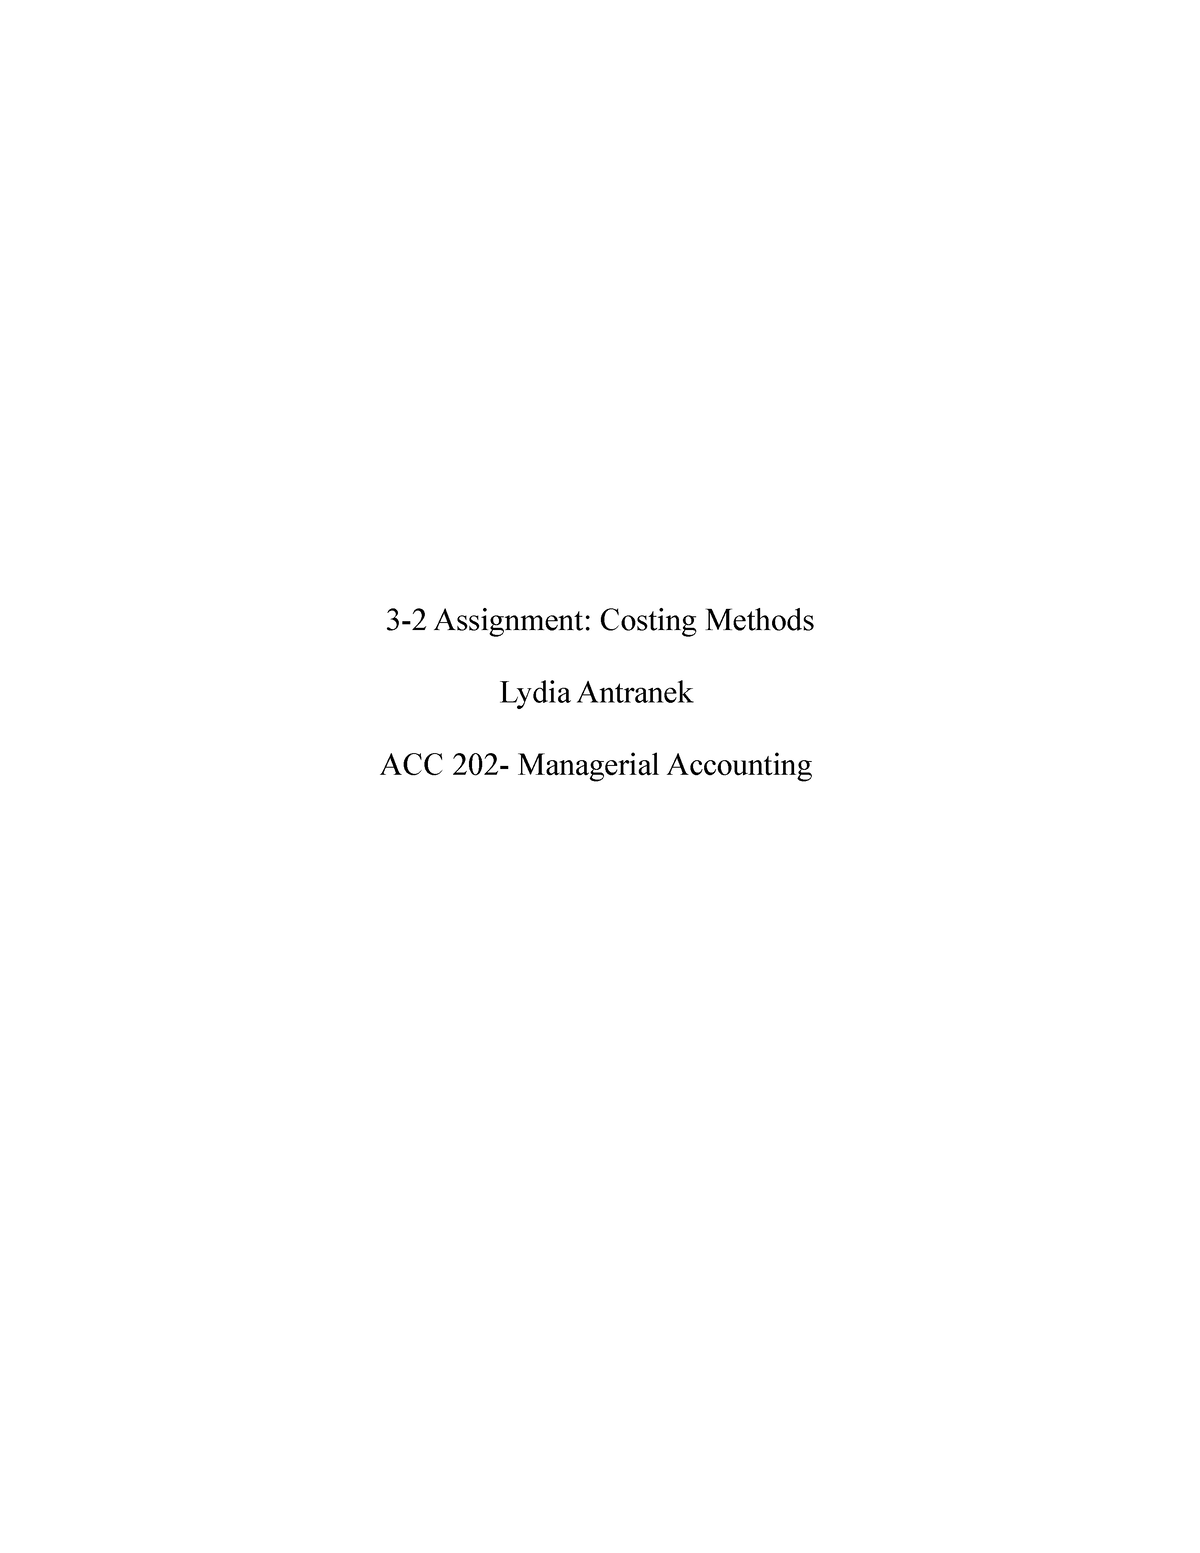 assignment costing methods